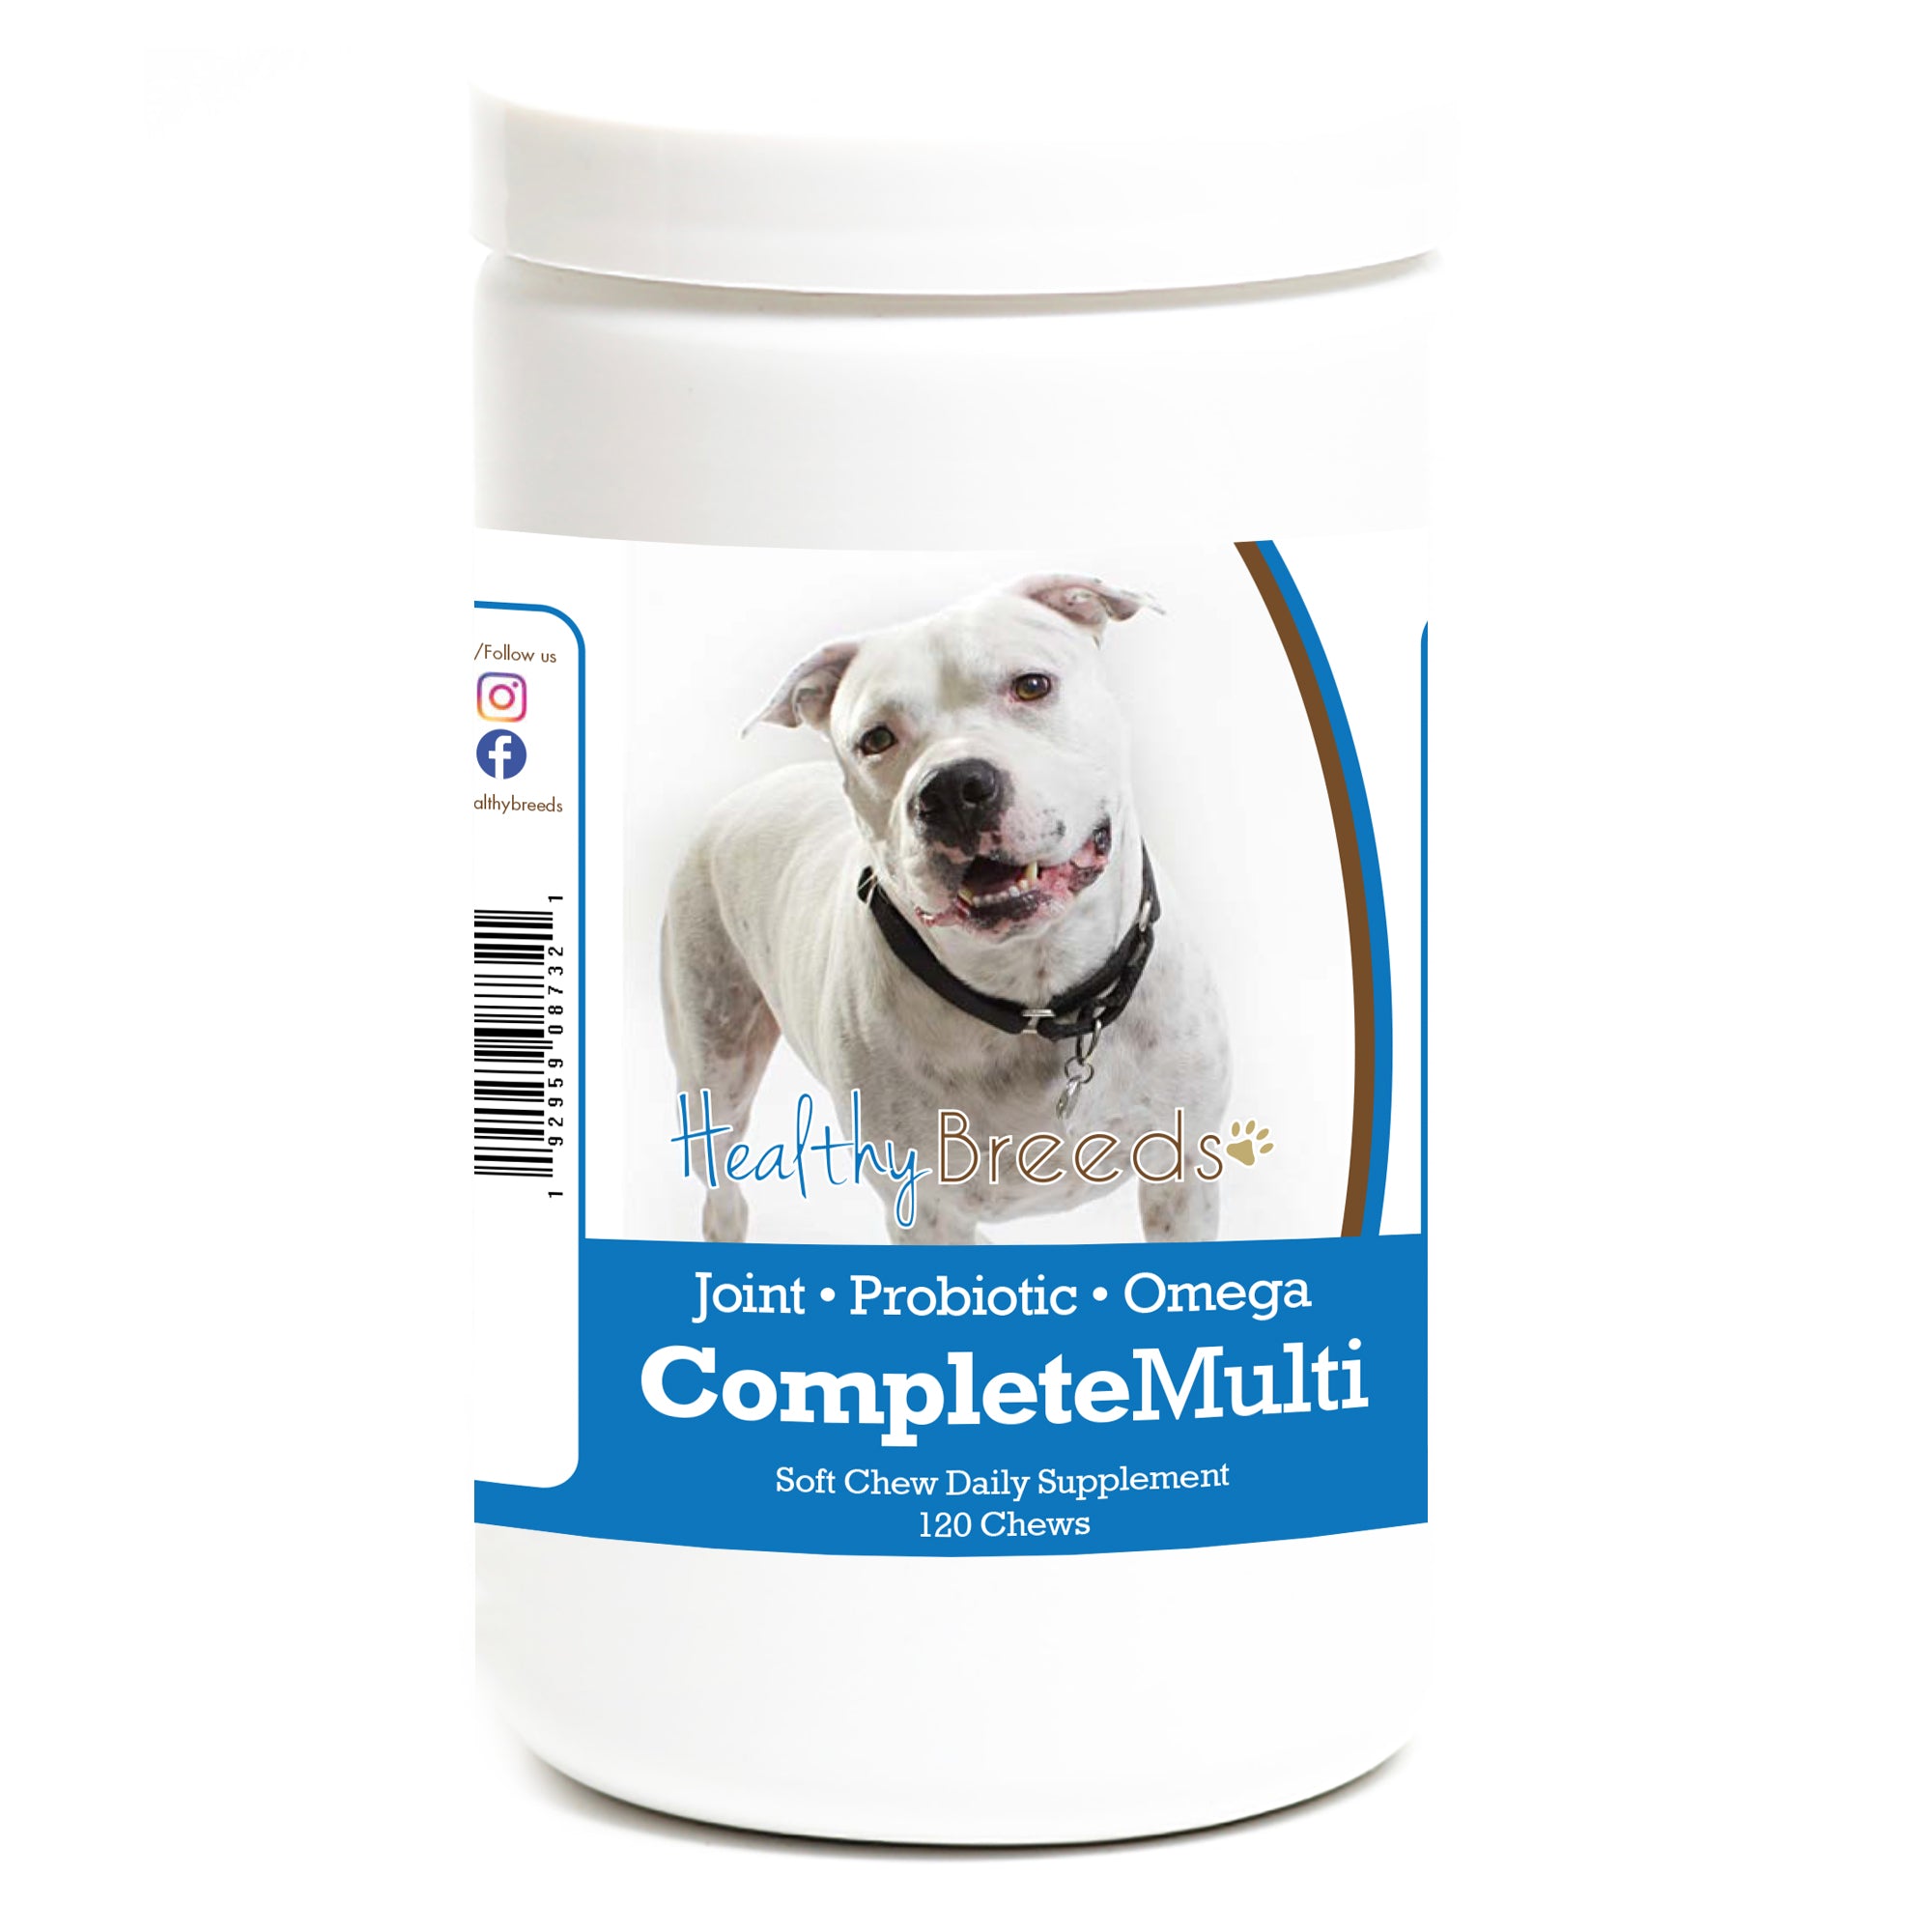 Pit Bull All In One Multivitamin Soft Chew 120 Count